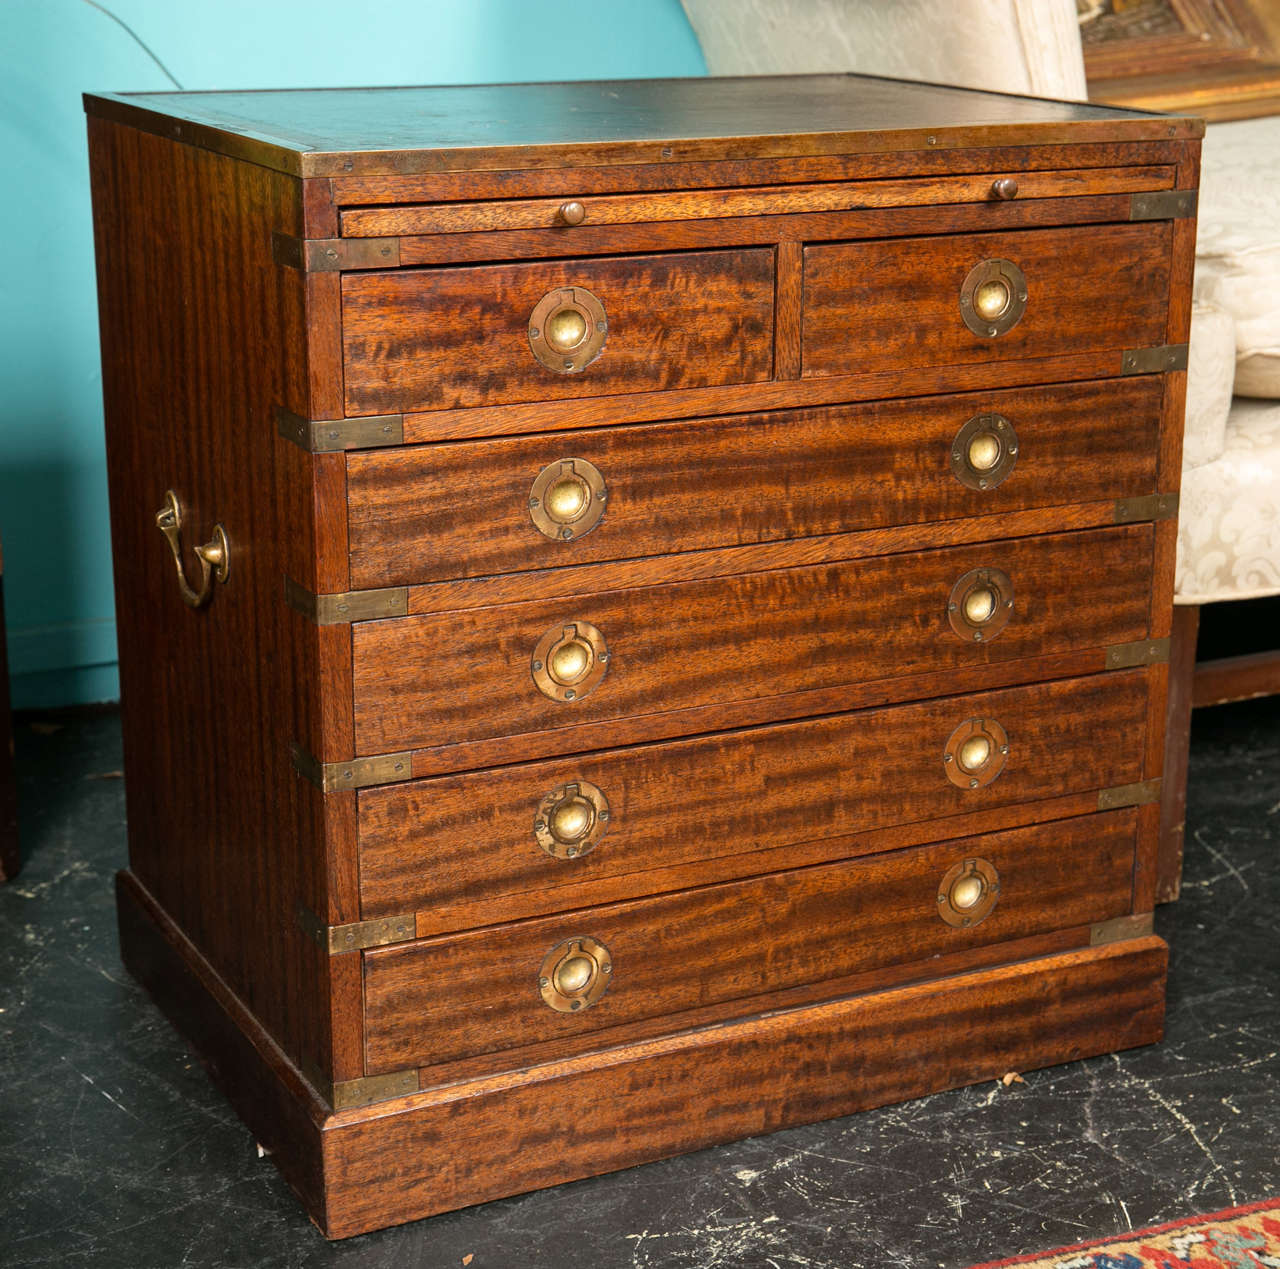 A Pair of military style brass bound mahogany side chests with 6 drawers and leather tip with pull out brass slides